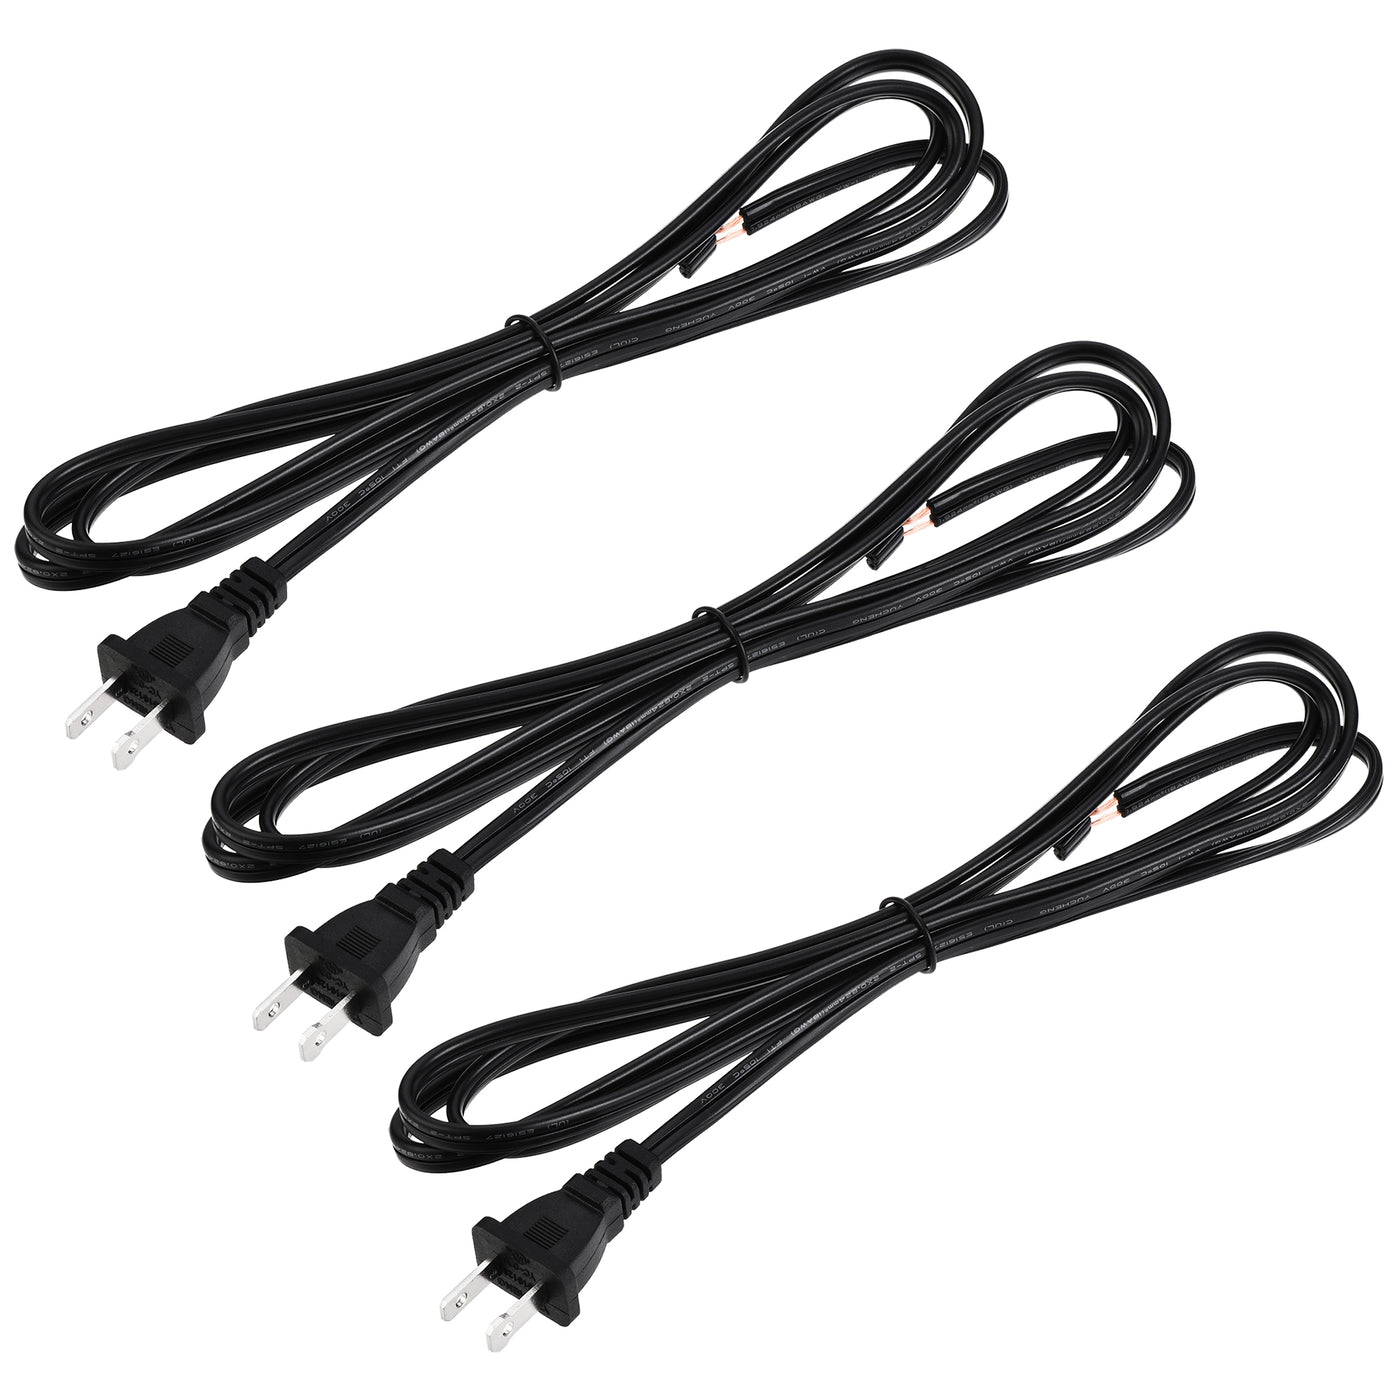 uxcell Uxcell US Plug Lamp Cord, SPT-2 18AWG Power Wire 1.8M Black, Replacement Lamp Repair Part, UL Listed 3Pcs